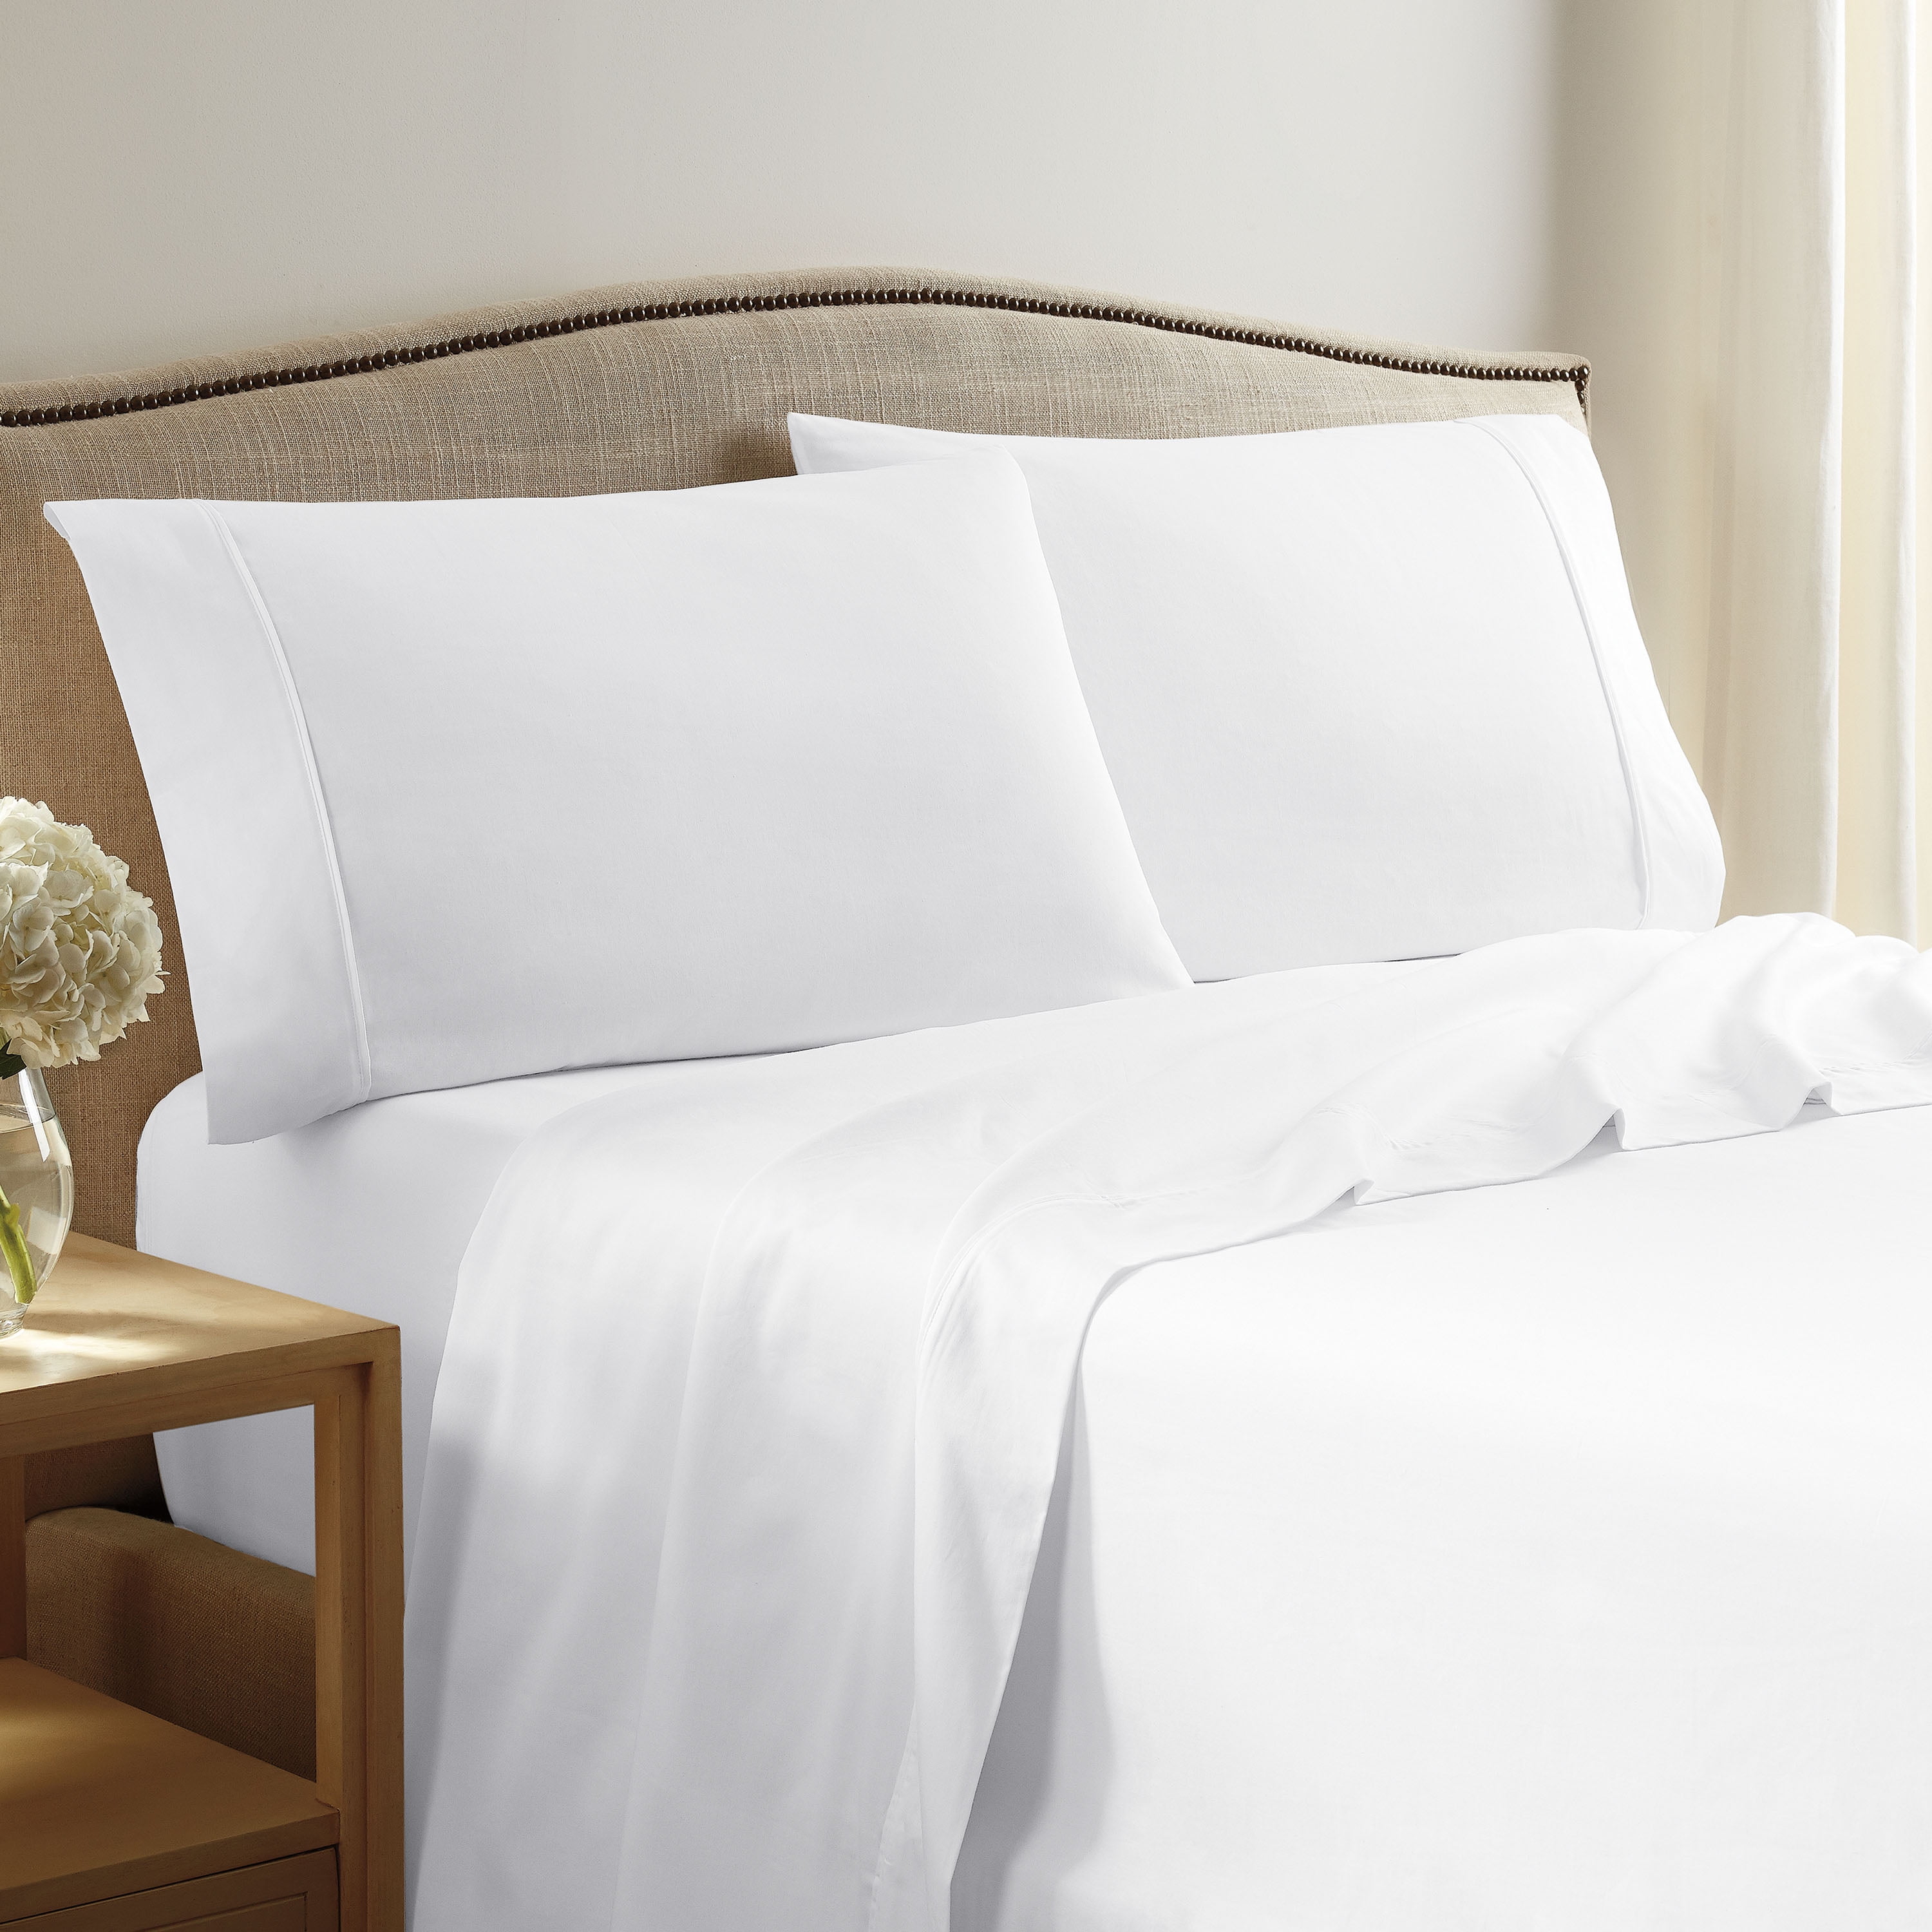 Martex 400 Thread Count Solid Sateen Cotton White Twin Sheet Set